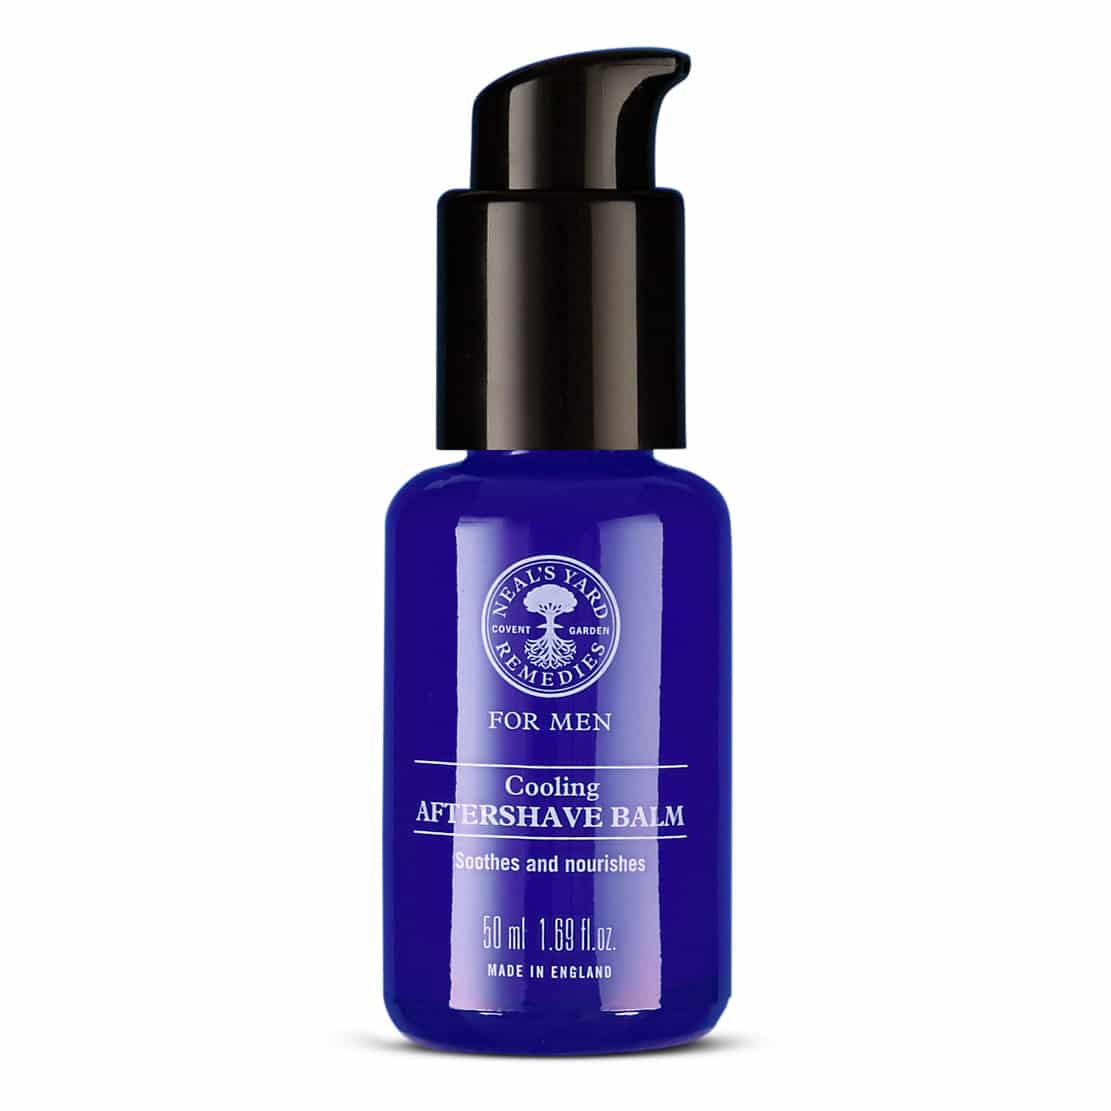 Neal's Yard Remedies For Men Cooling After-Shave Balm 50ml